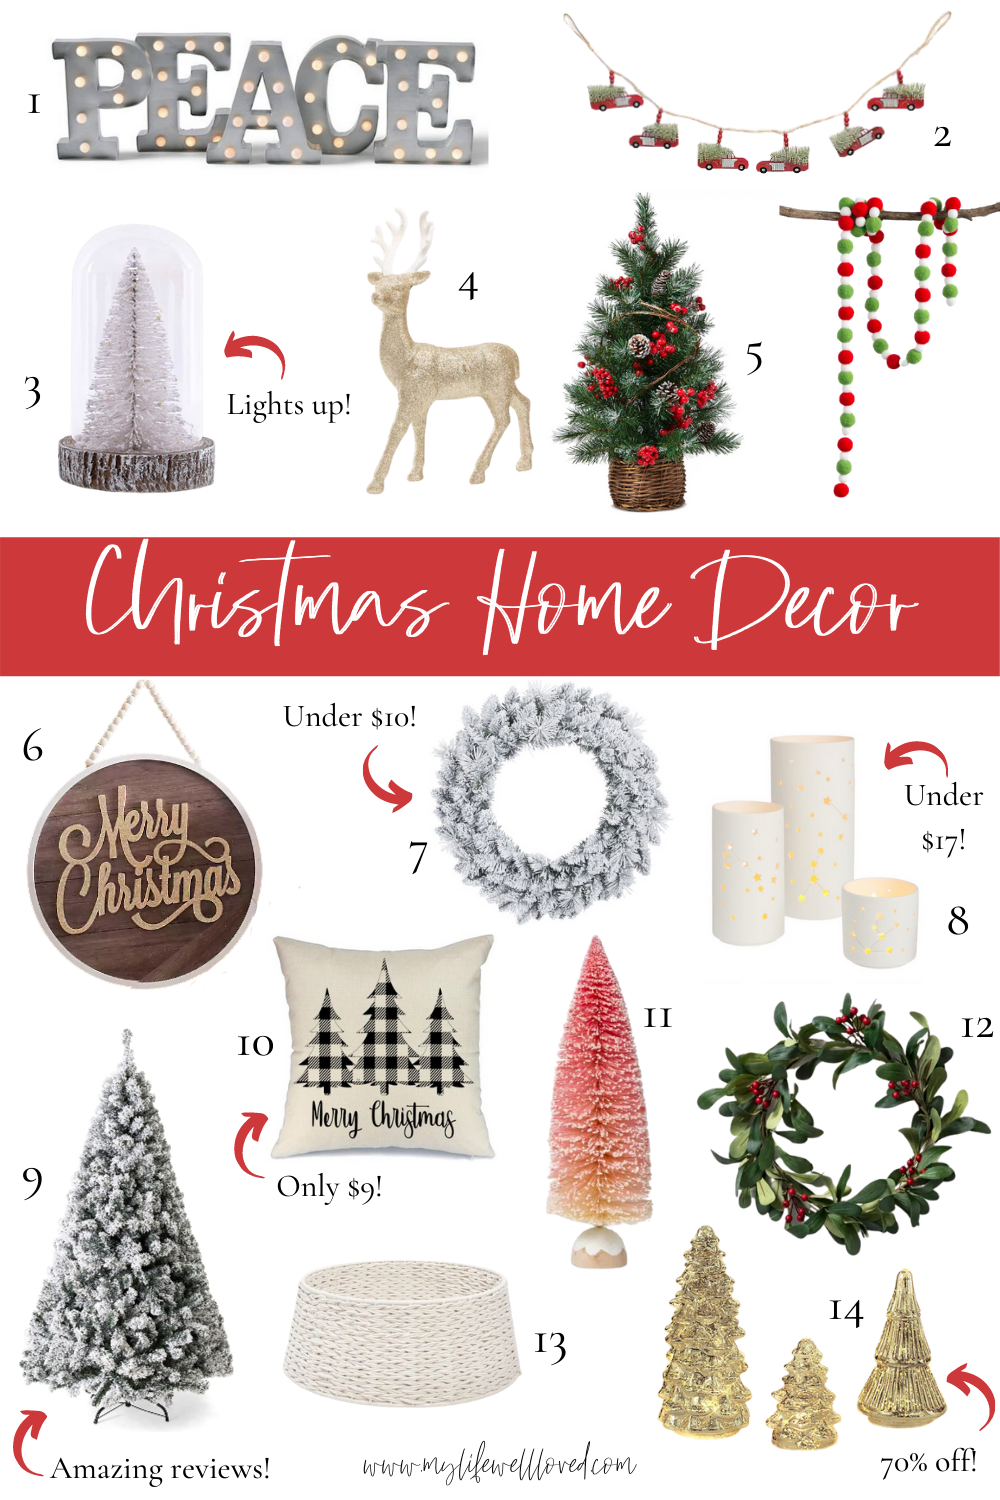 Amazon Christmas Decorations by Alabama Family + Style blogger, Heather Brown // My Life Well Loved